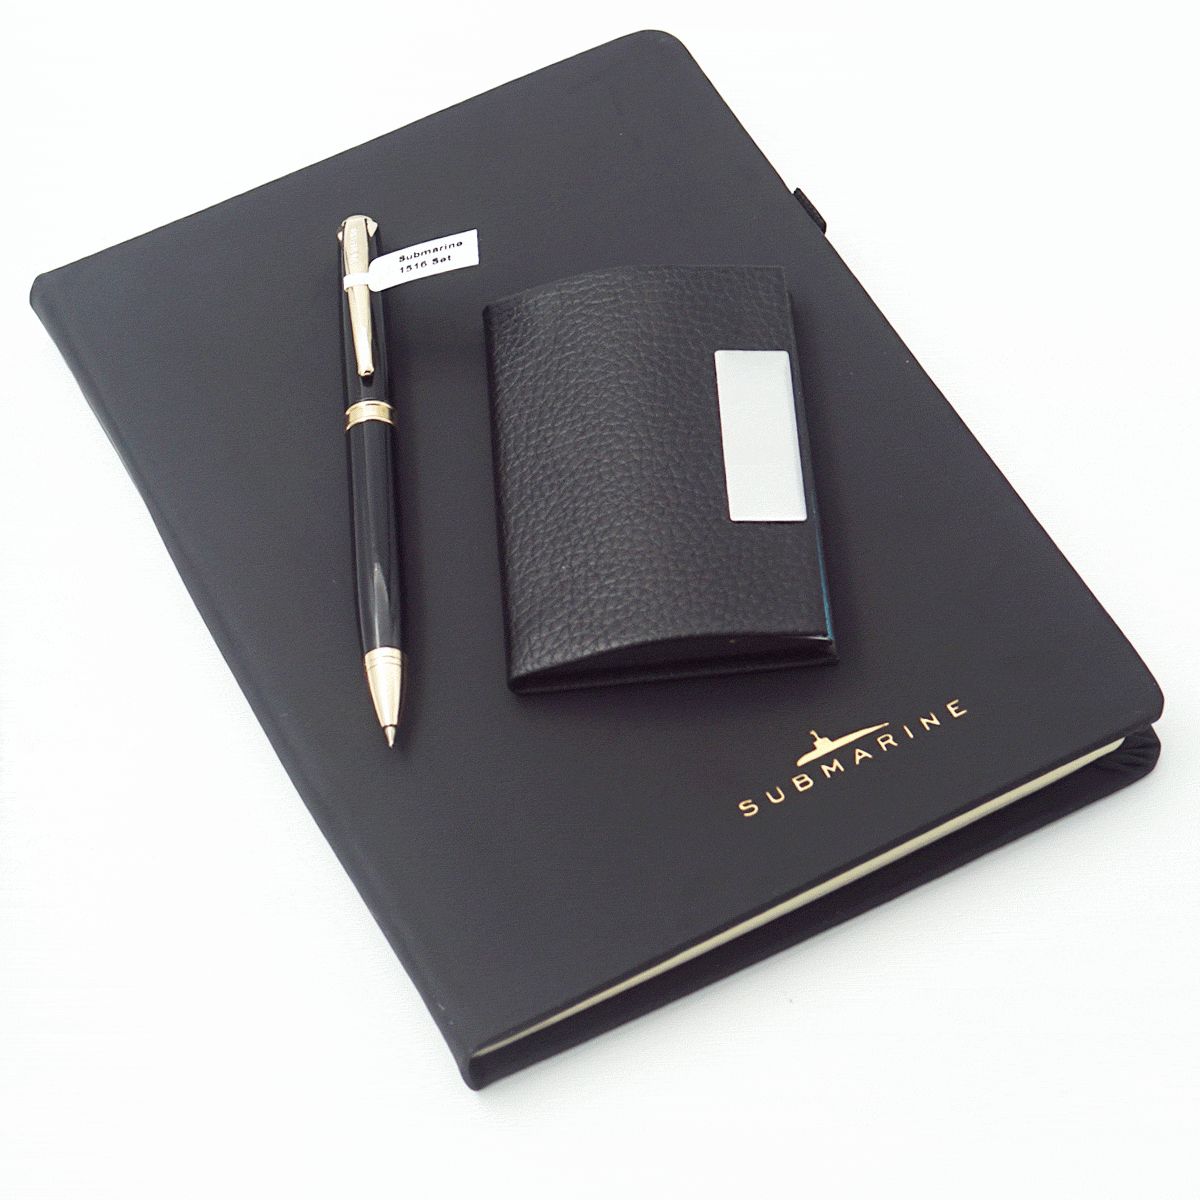 Submarine 1516 Black Color Body with Black Color Cap And Gold Clip Fine Tip Twist Type Ball Pen With Diary And Card Holder Pen Set SKU 23926